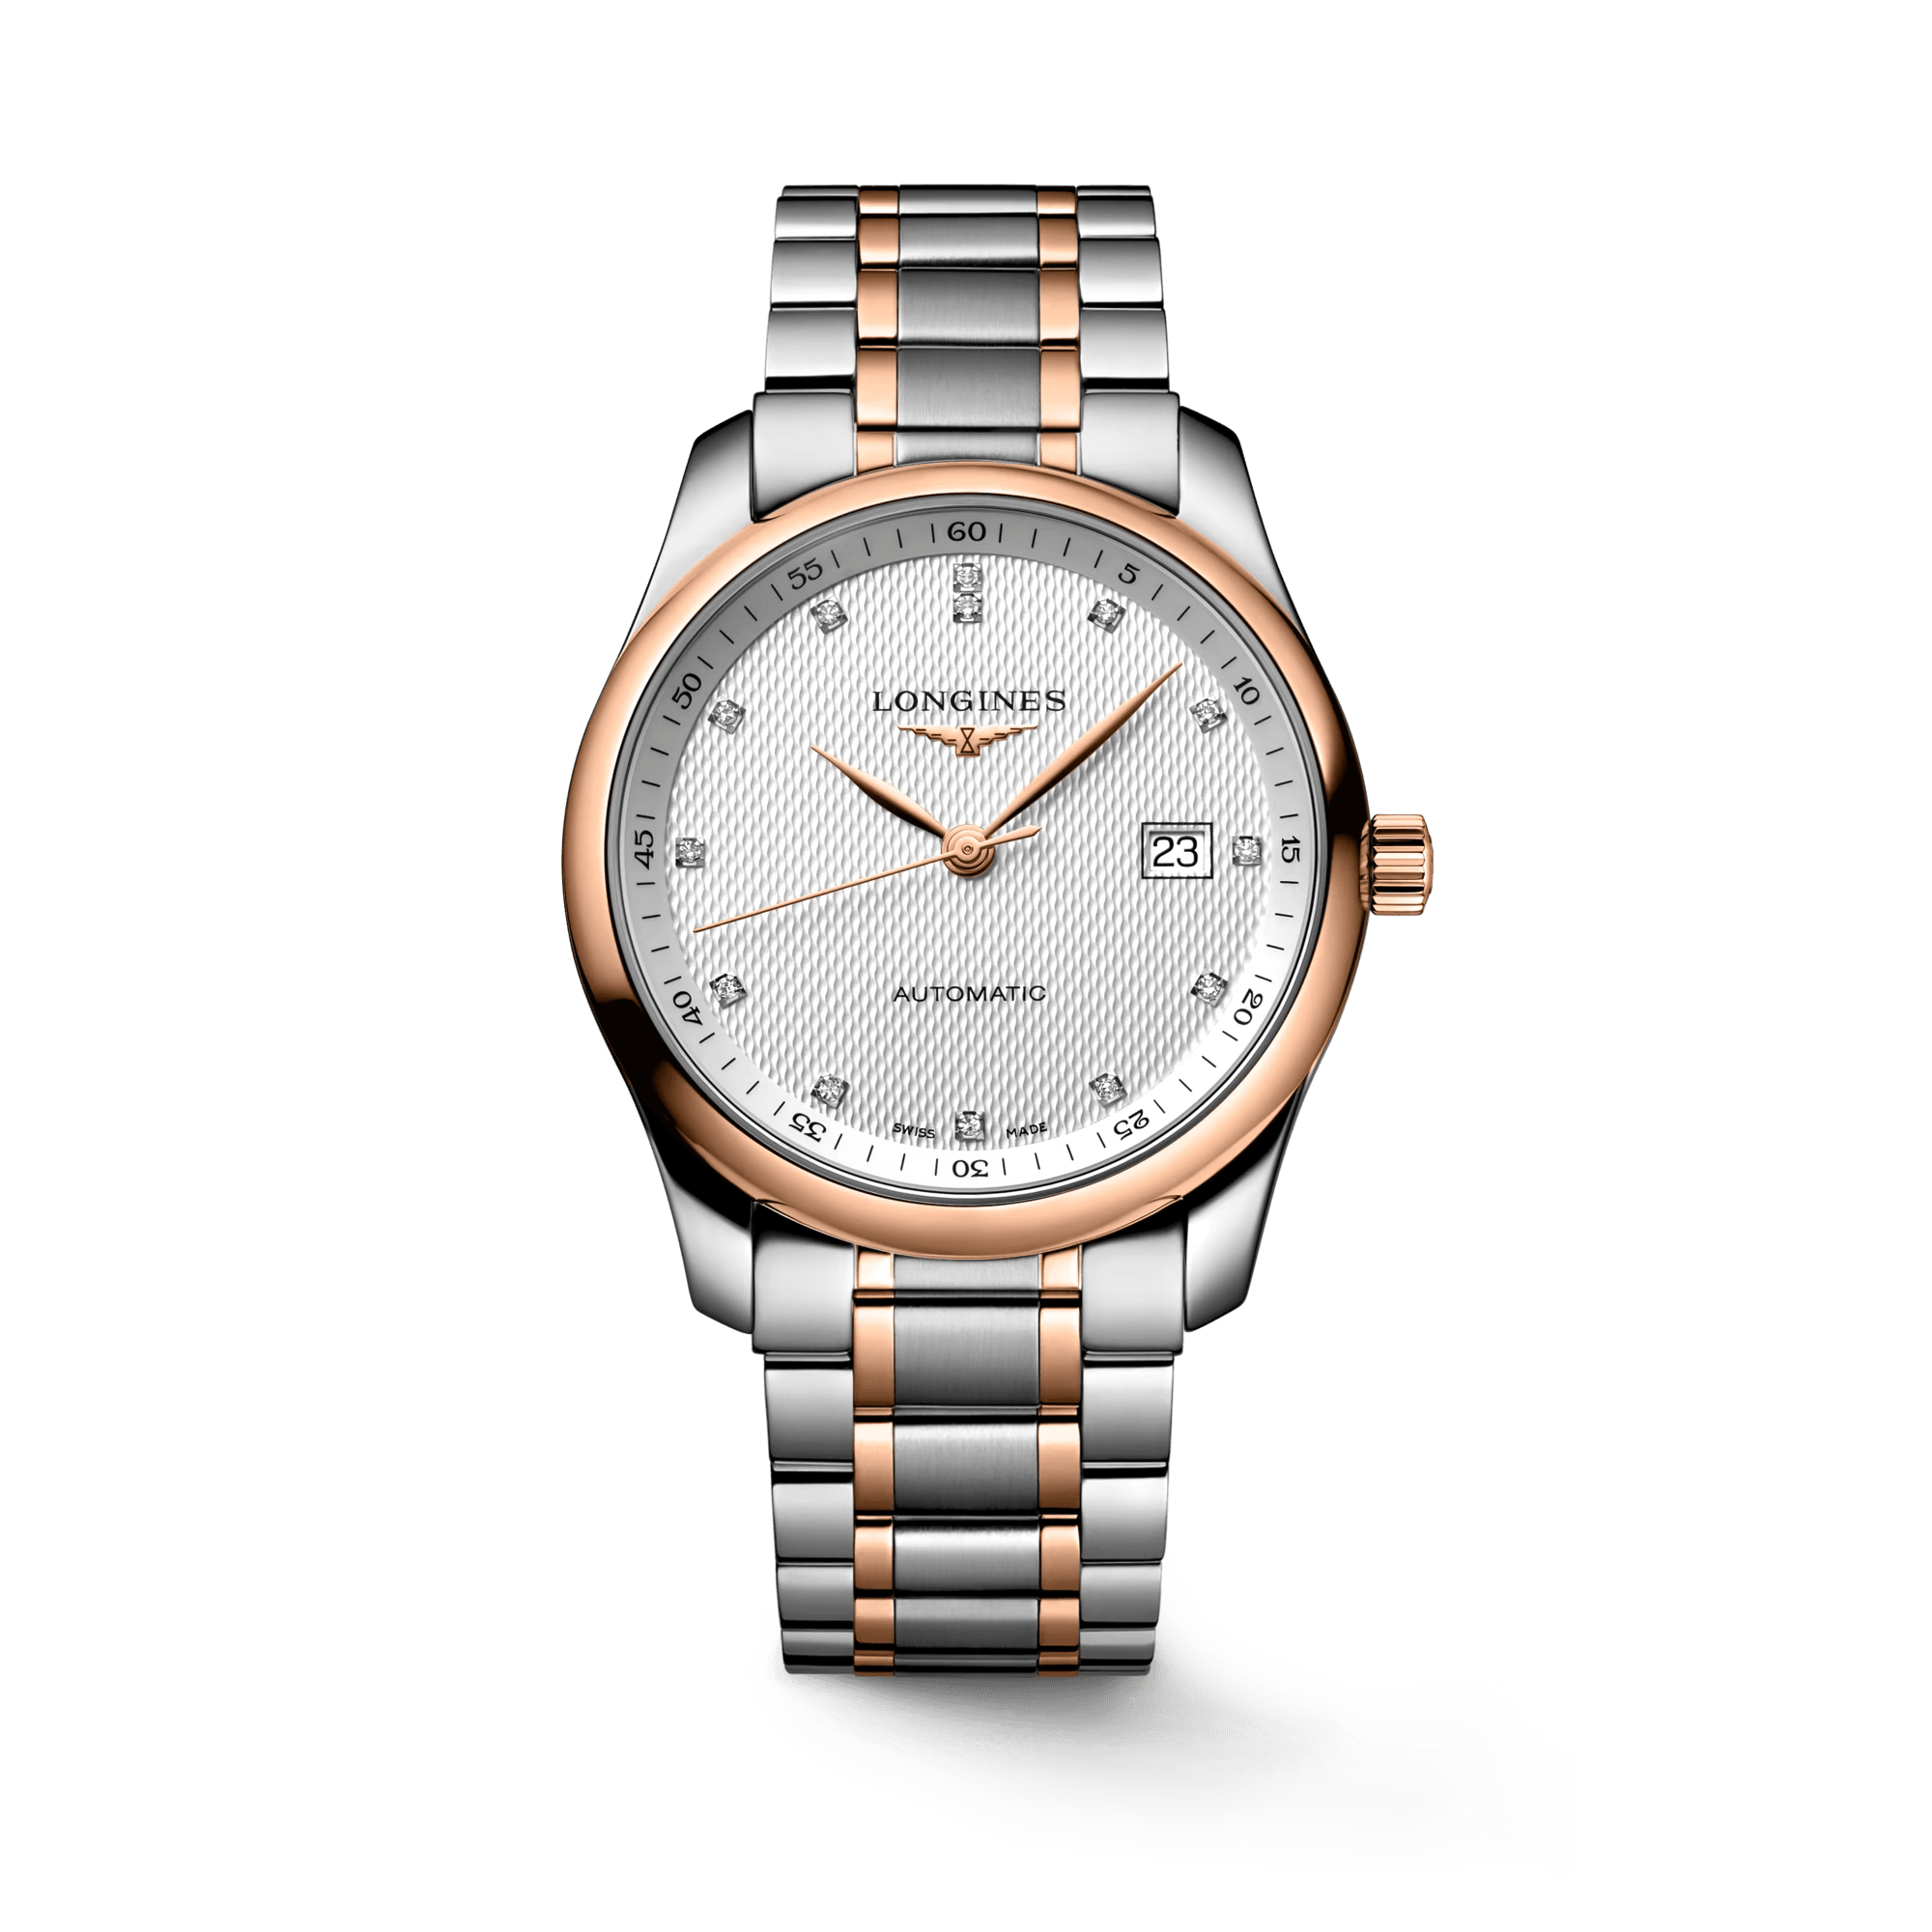 The Longines Master Collection Automatic Men's Watch L27935777